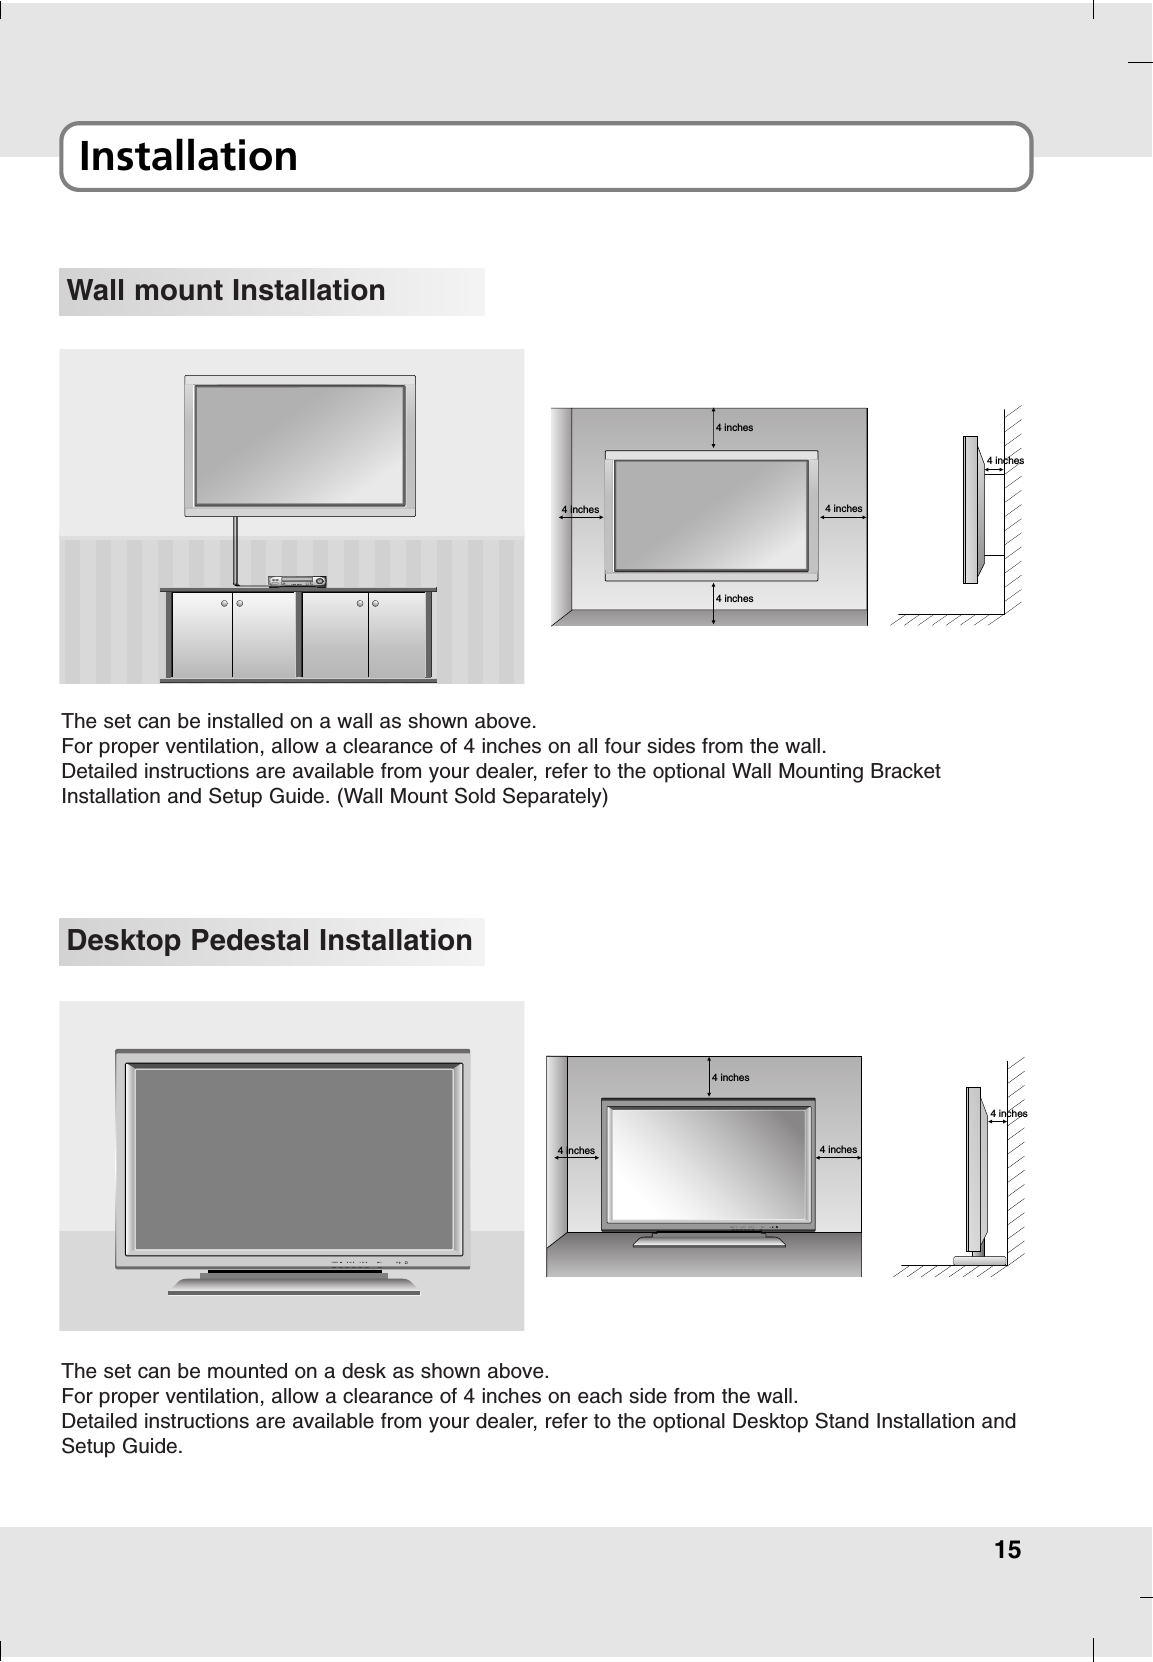 15Installation Wall mount Installation4 inches4 inches4 inches4 inches4 inchesThe set can be installed on a wall as shown above.For proper ventilation, allow a clearance of 4 inches on all four sides from the wall.Detailed instructions are available from your dealer, refer to the optional Wall Mounting BracketInstallation and Setup Guide. (Wall Mount Sold Separately)Desktop Pedestal Installation4 inches4 inches4 inches4 inchesThe set can be mounted on a desk as shown above.For proper ventilation, allow a clearance of 4 inches on each side from the wall.Detailed instructions are available from your dealer, refer to the optional Desktop Stand Installation andSetup Guide.